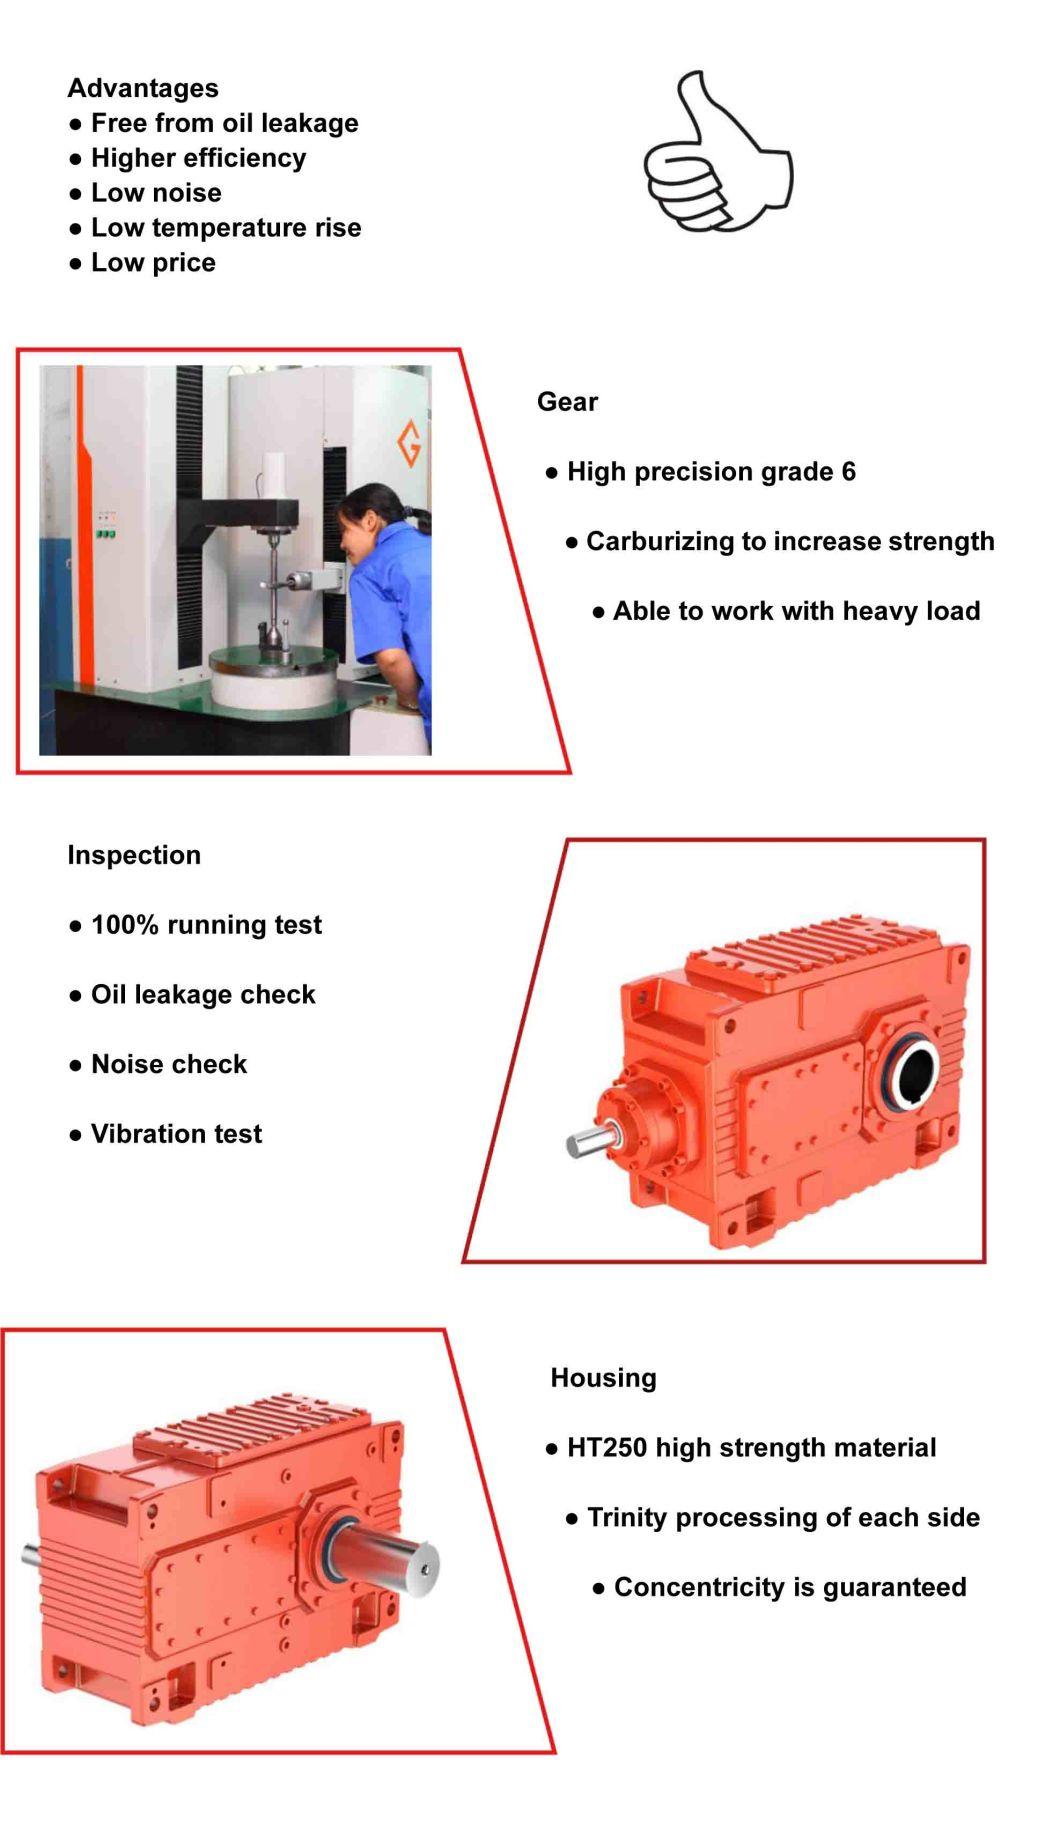 Helical Industrial Gear Box, Speed Gear Reducer for Rubber machinery